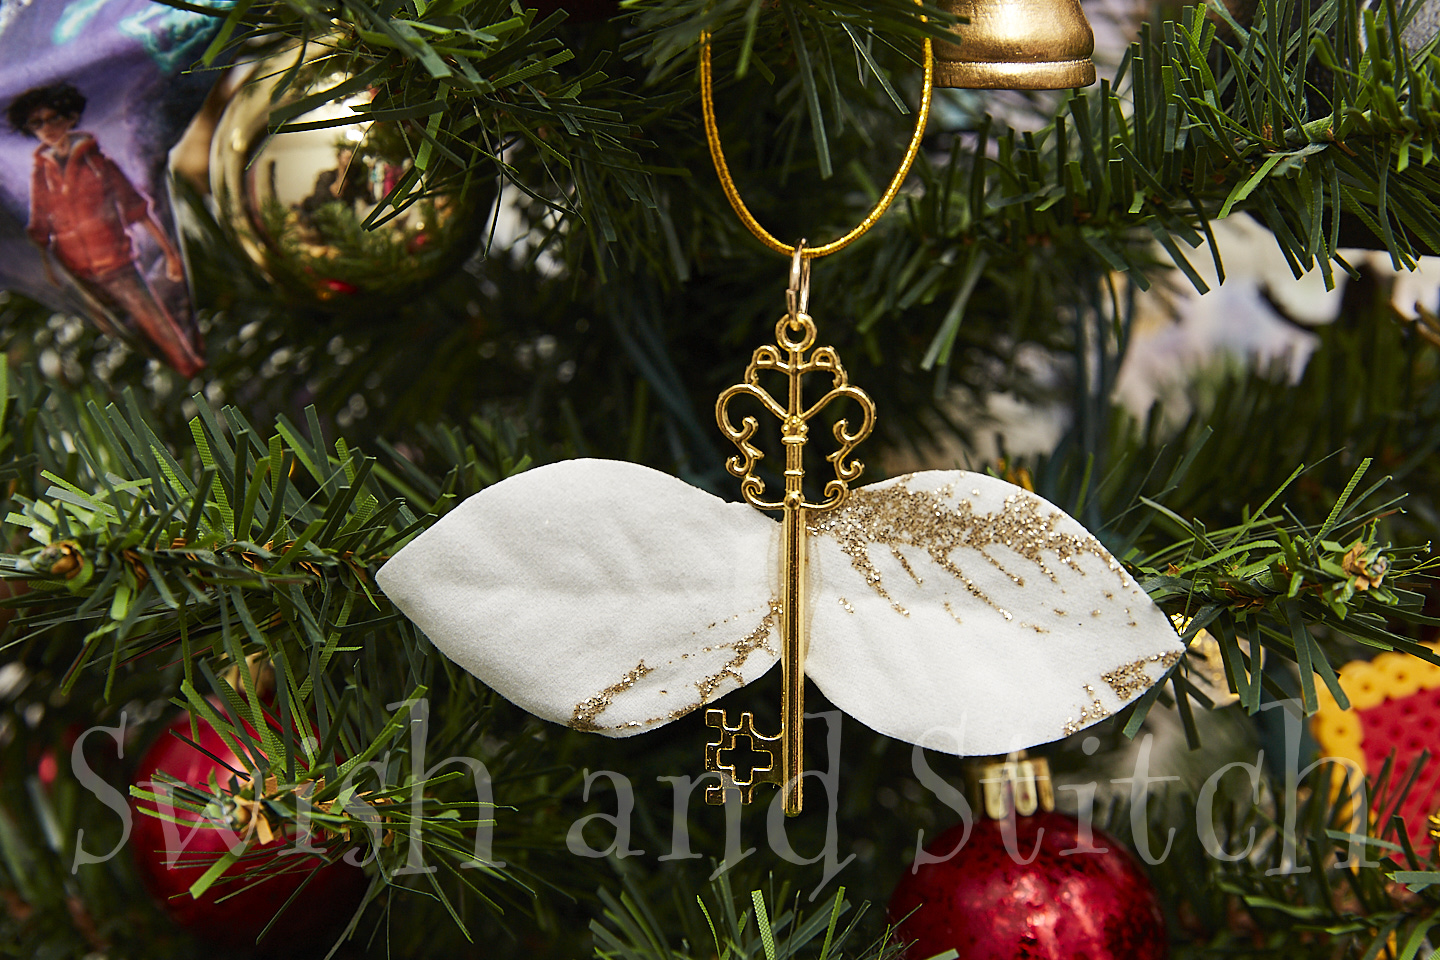 DIY Harry Potter Floating Ornaments ⋆ The Quiet Grove